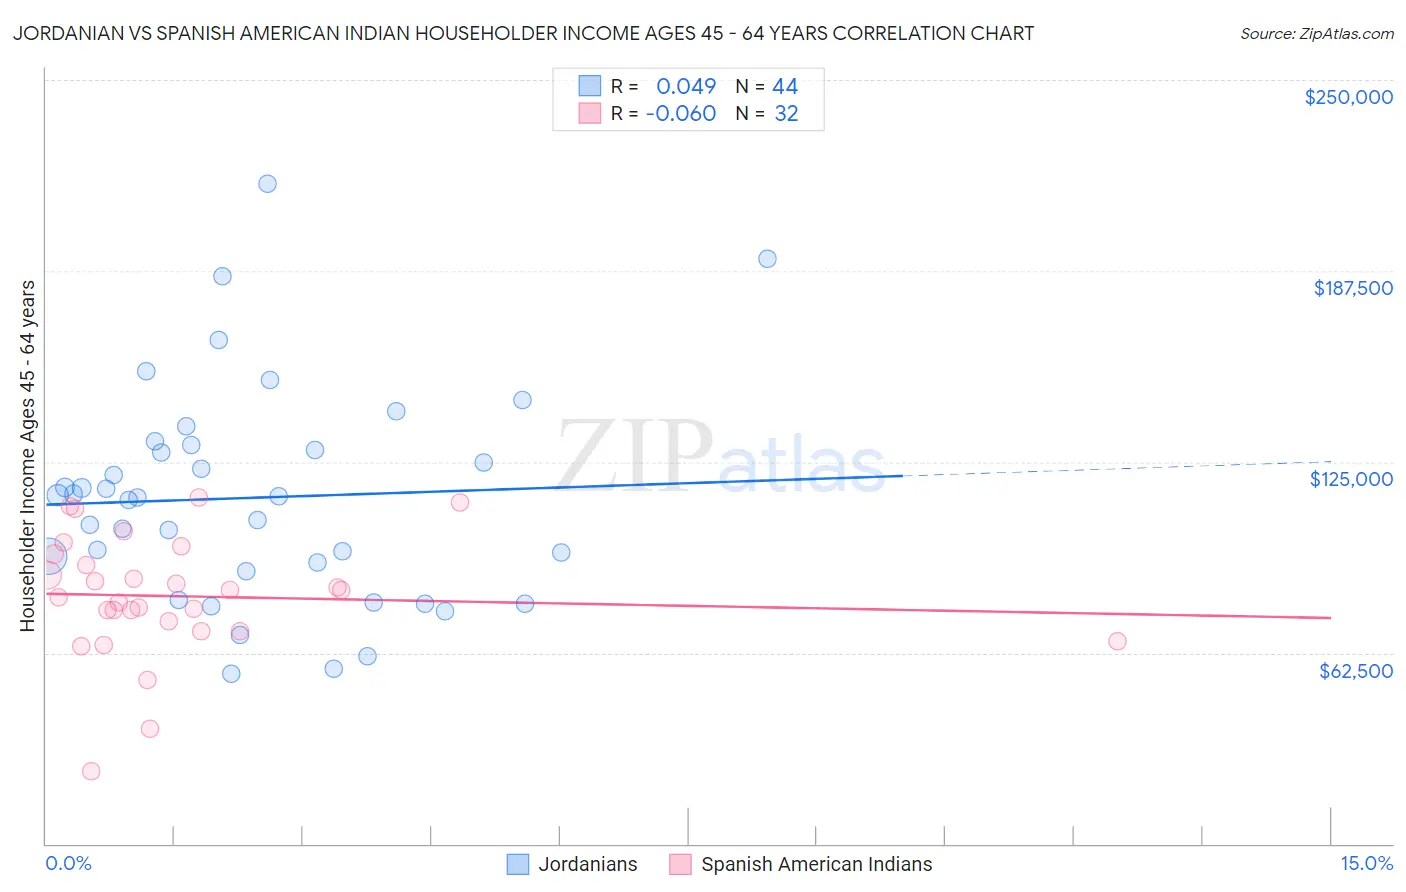 Jordanian vs Spanish American Indian Householder Income Ages 45 - 64 years